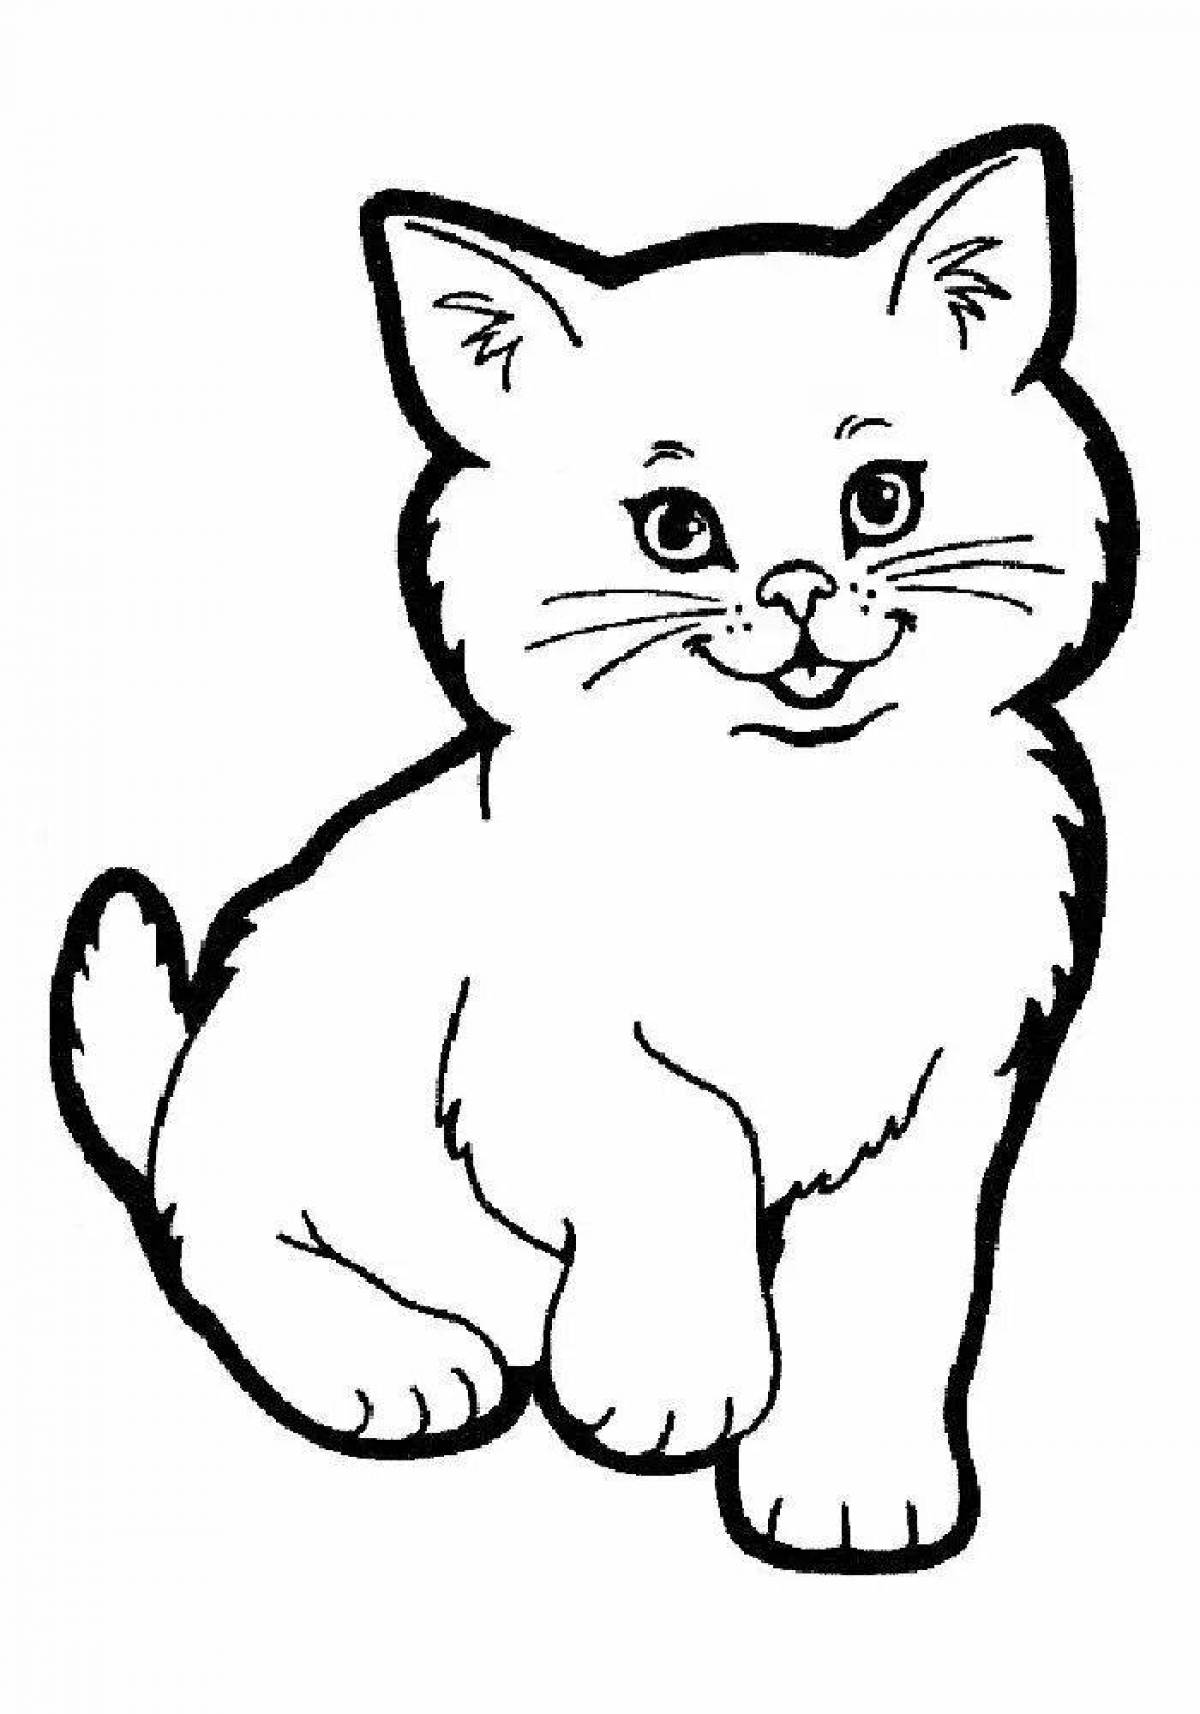 Humorous drawing of a cat